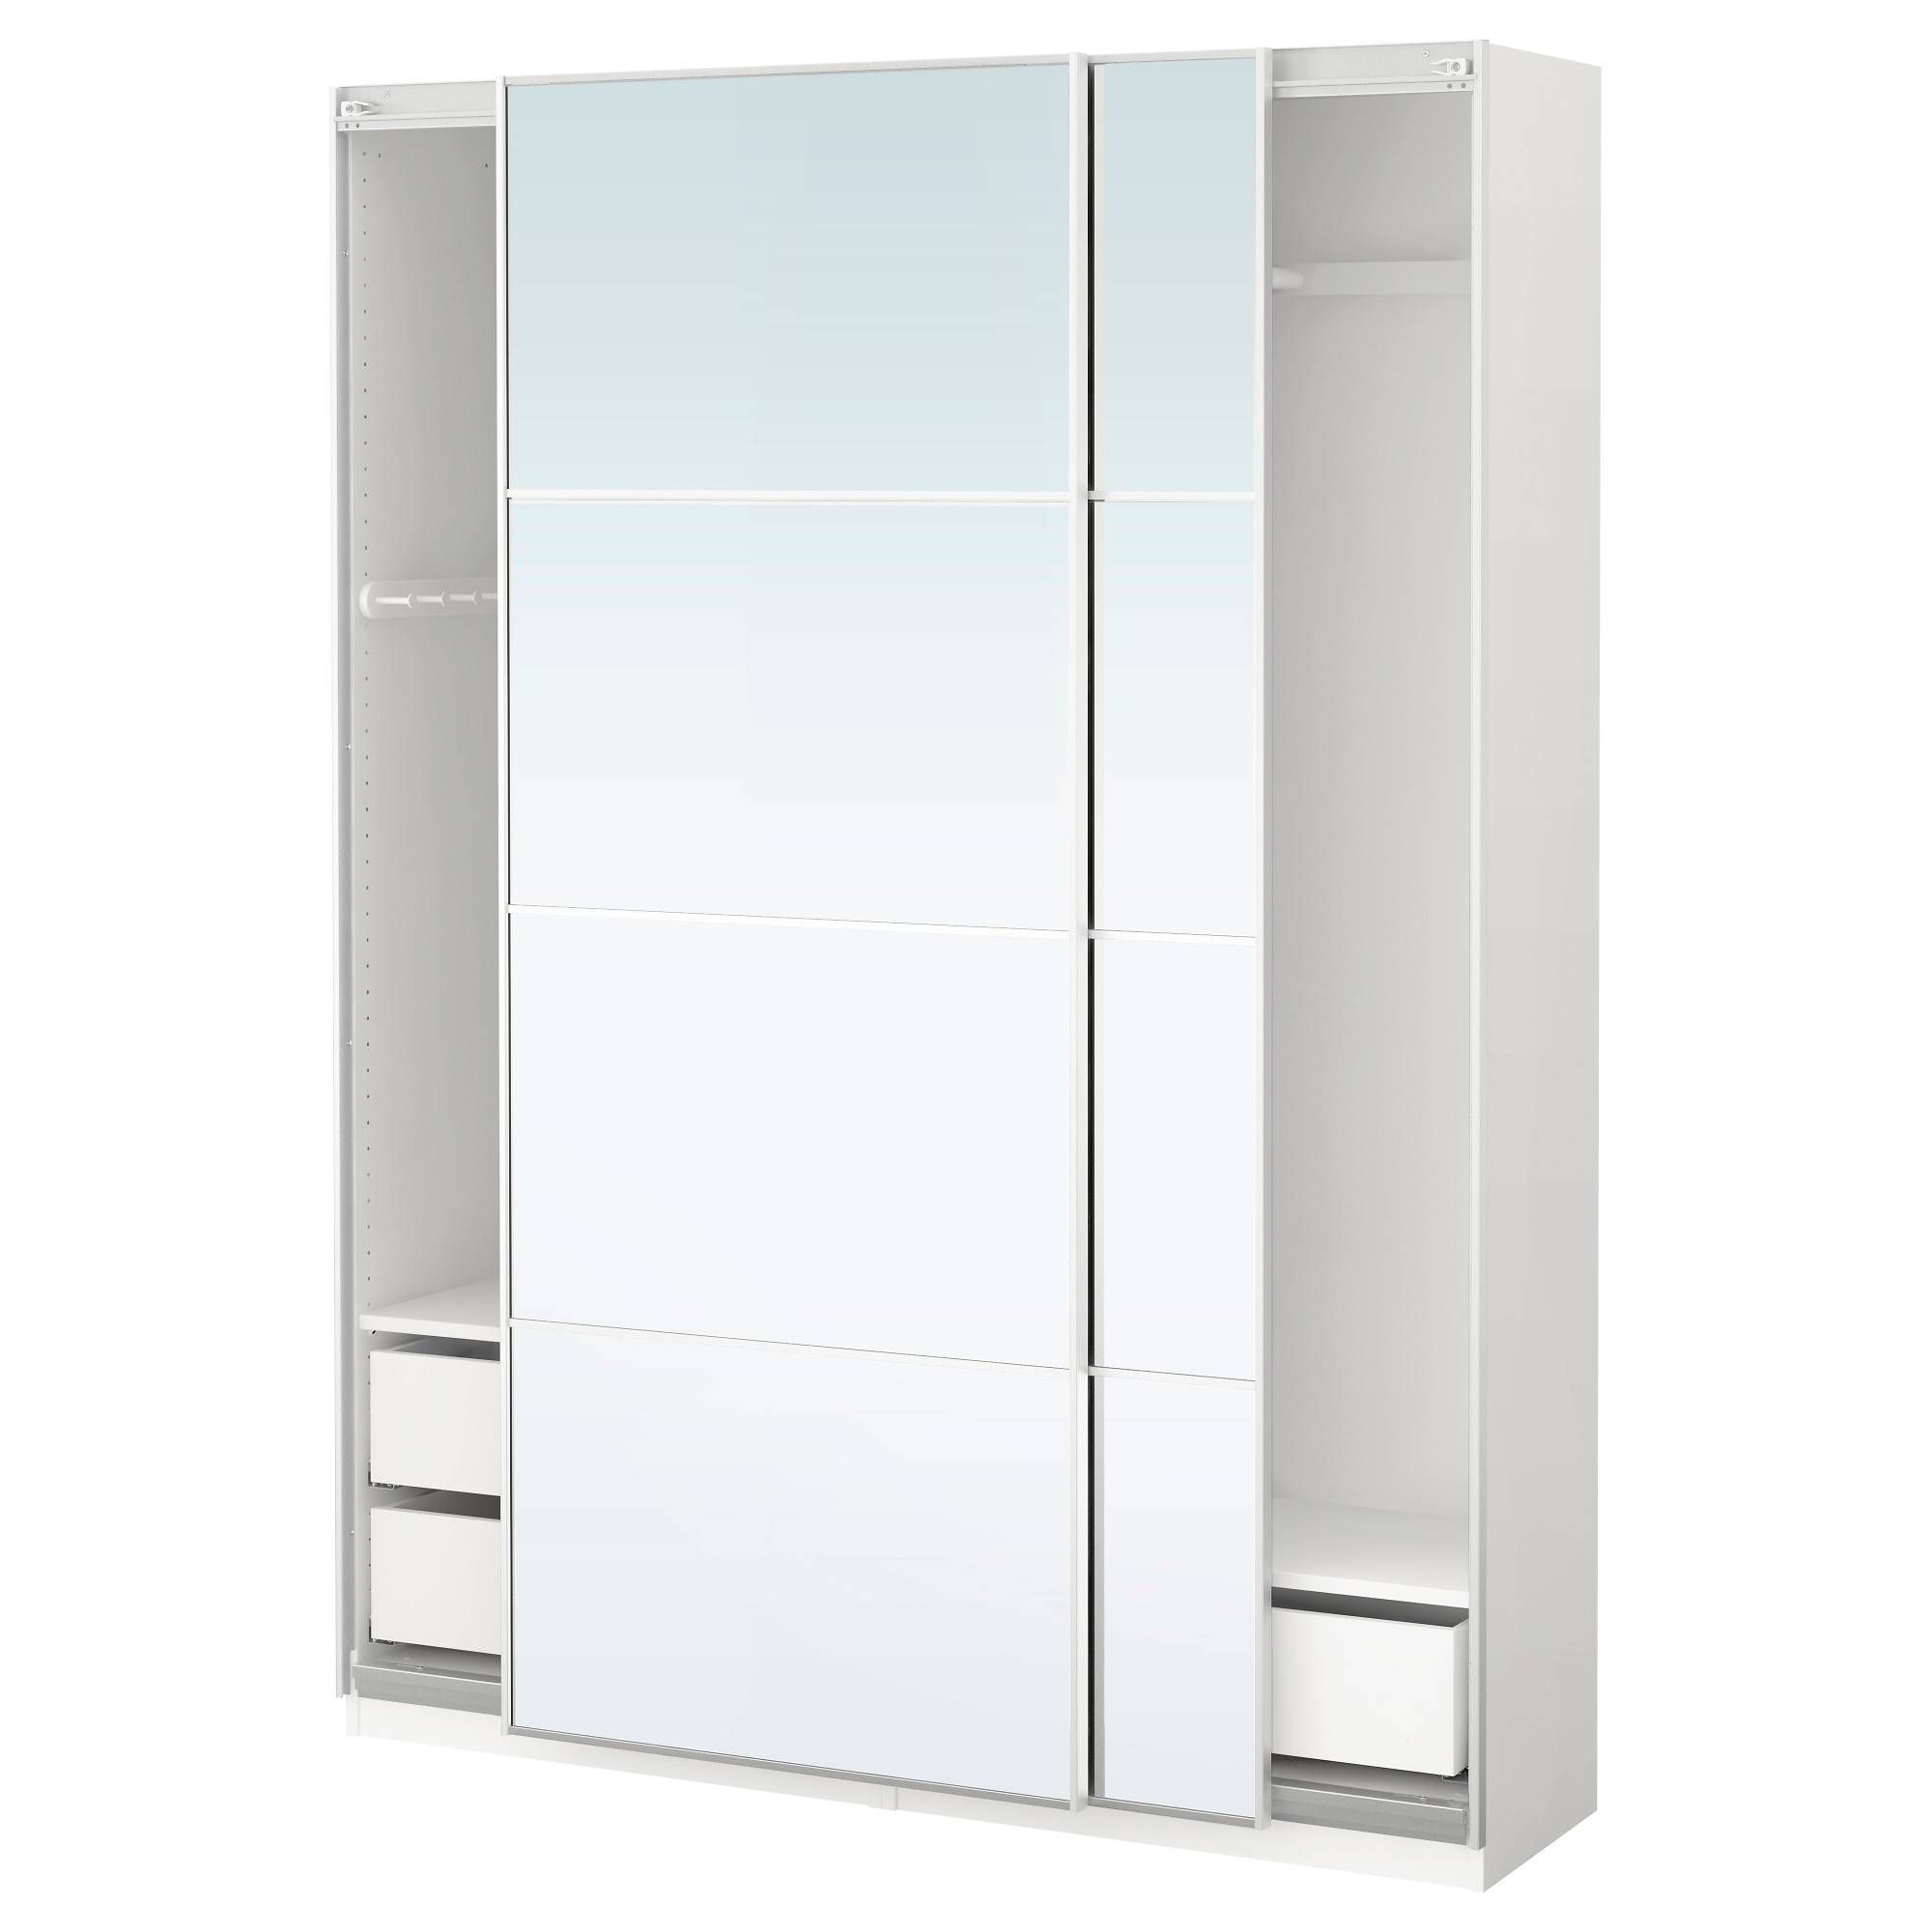 Wardrobes & Armoires – Open, Fitted, Sliding Doors & More – Ikea With White Cheap Wardrobes (View 12 of 15)